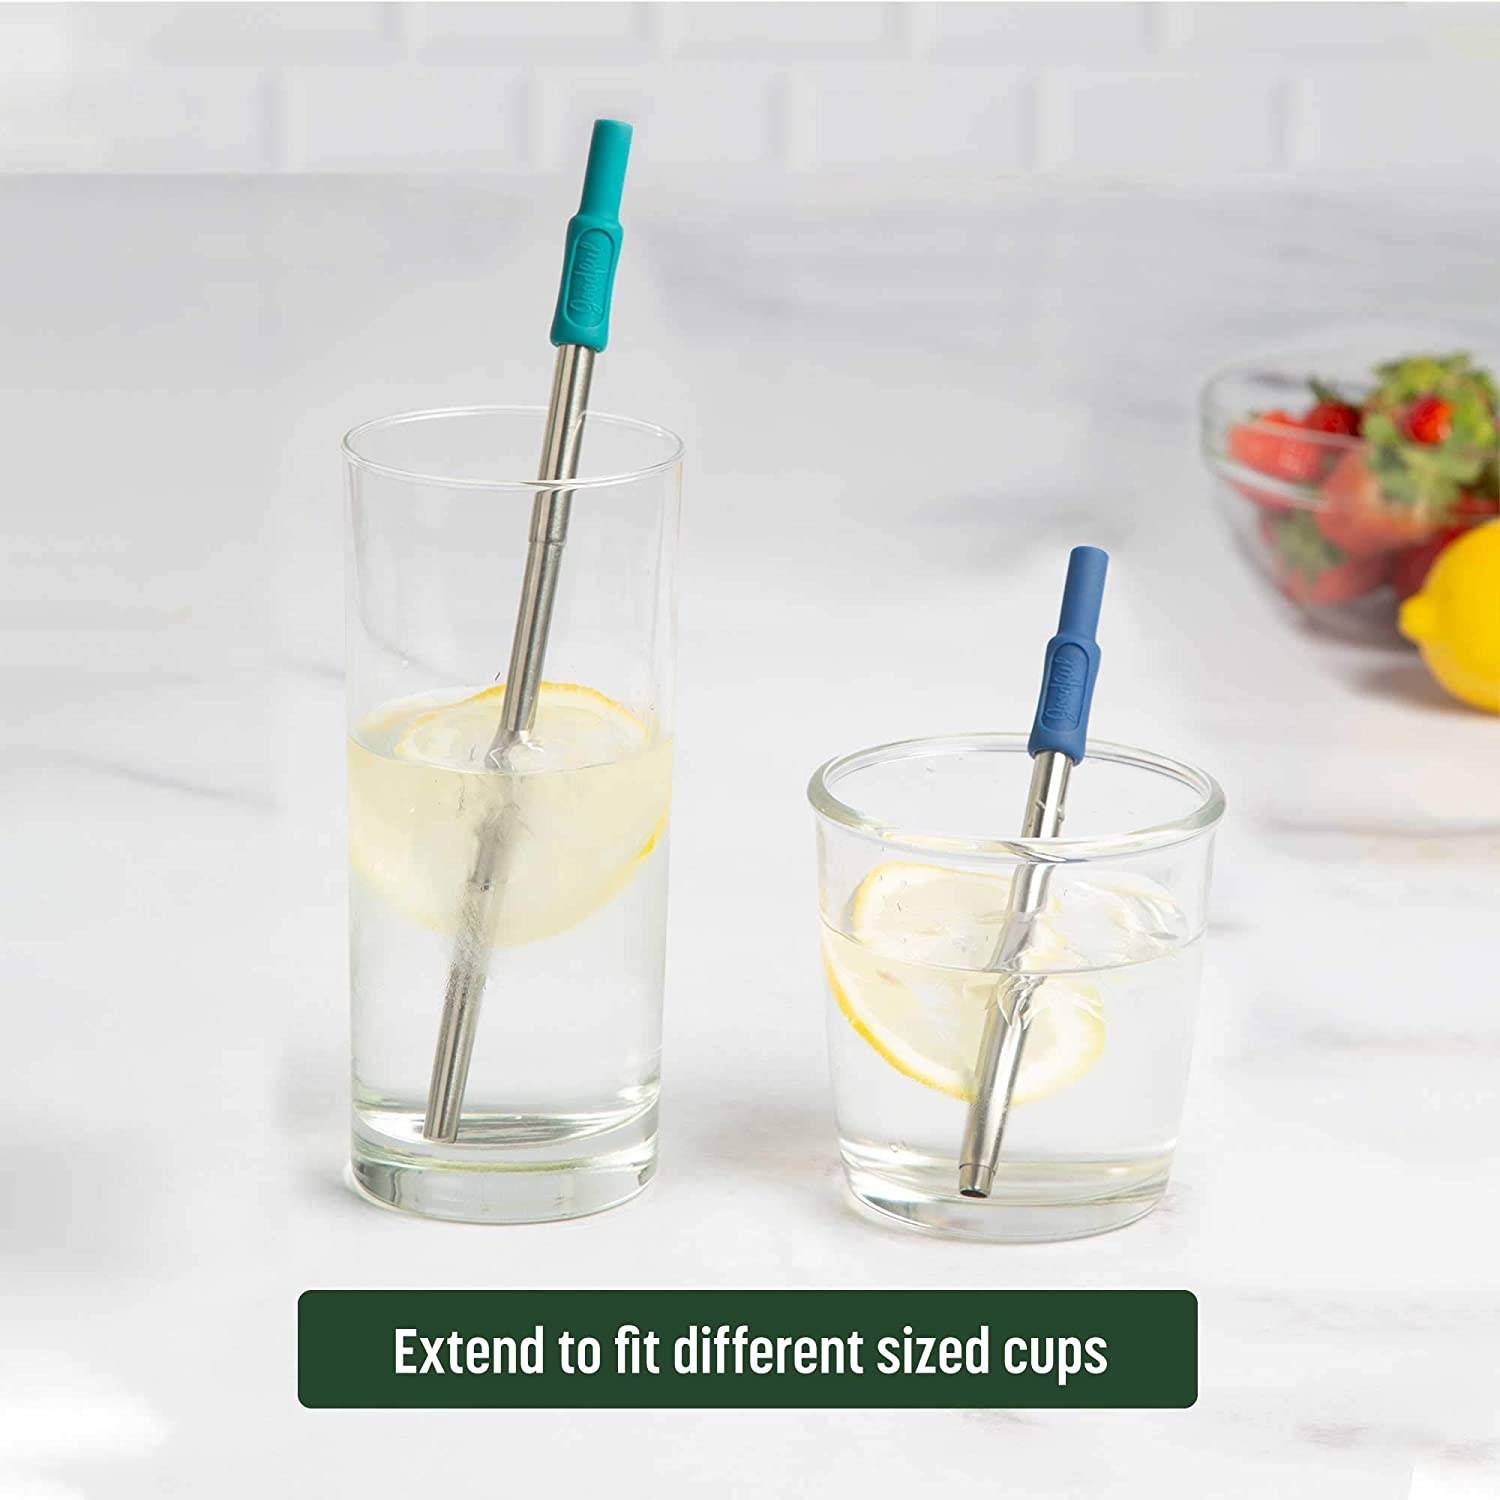 Two straws at different lengths: one long and one short